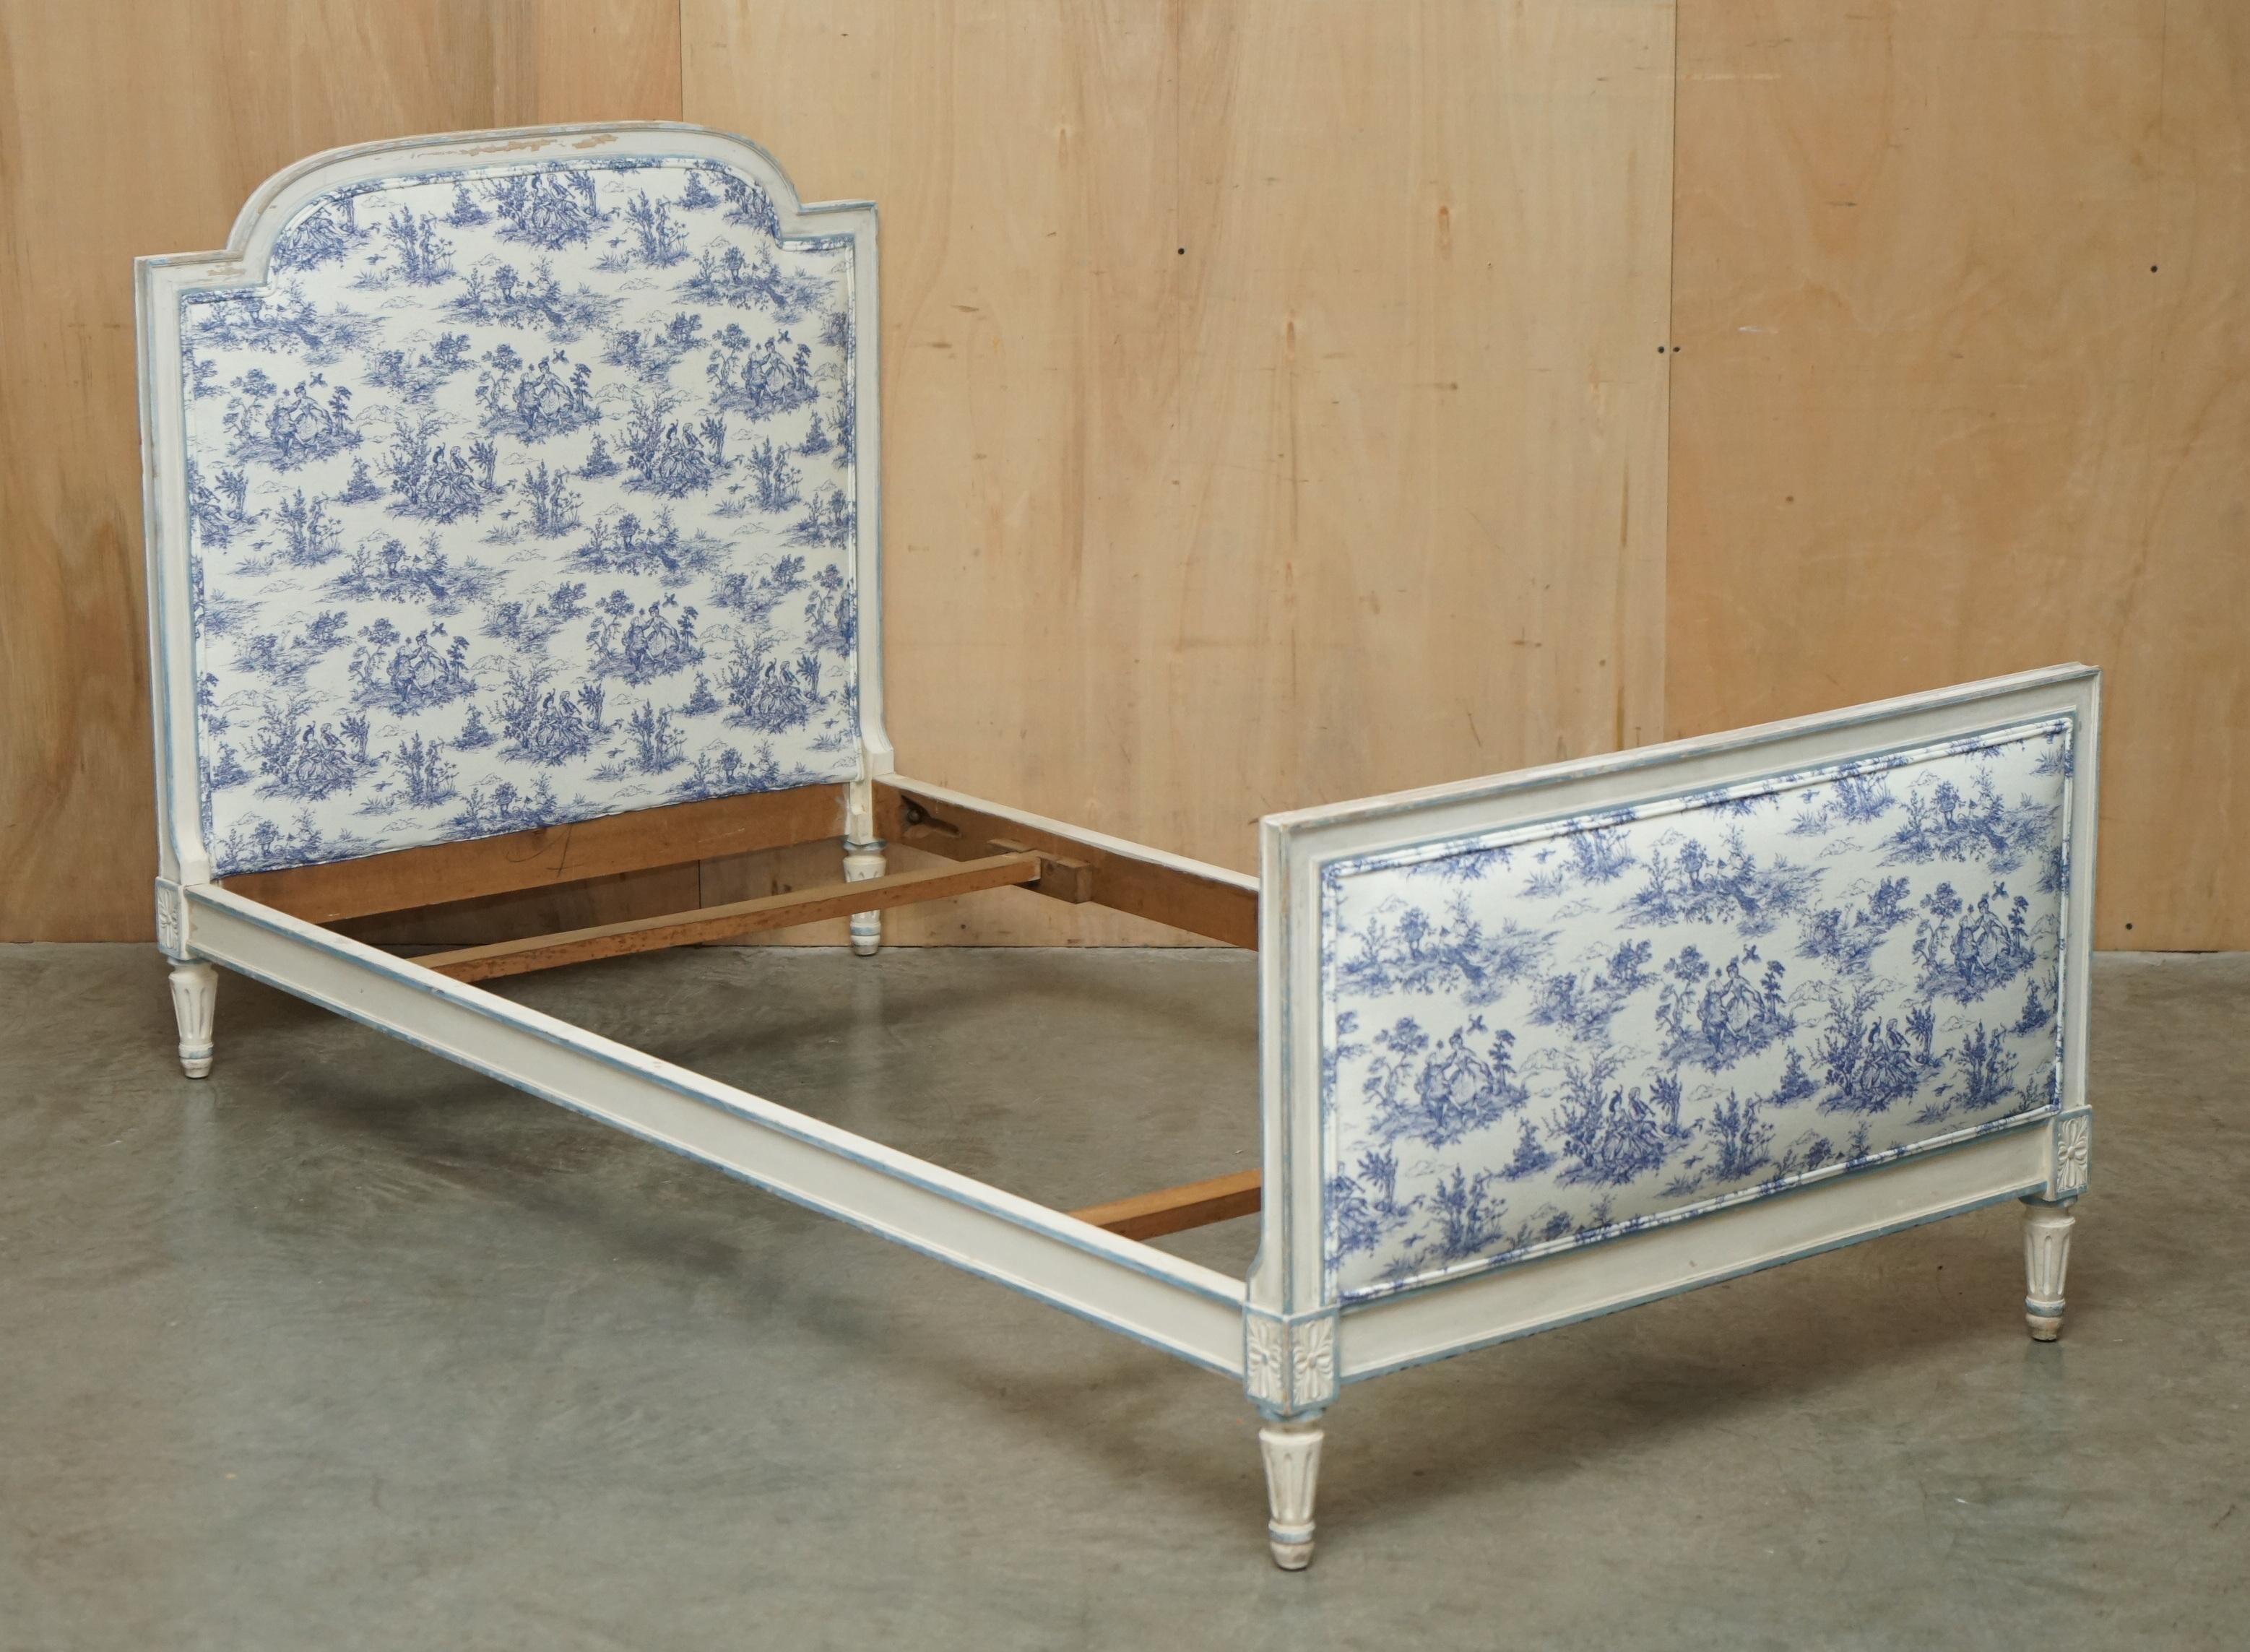 Royal House Antiques

Royal House Antiques is delighted to offer for sale this very fine pair of original French Country single bedstead frames with lovely Toile De Jouy upholstery 

Please note the delivery fee listed is just a guide, it covers